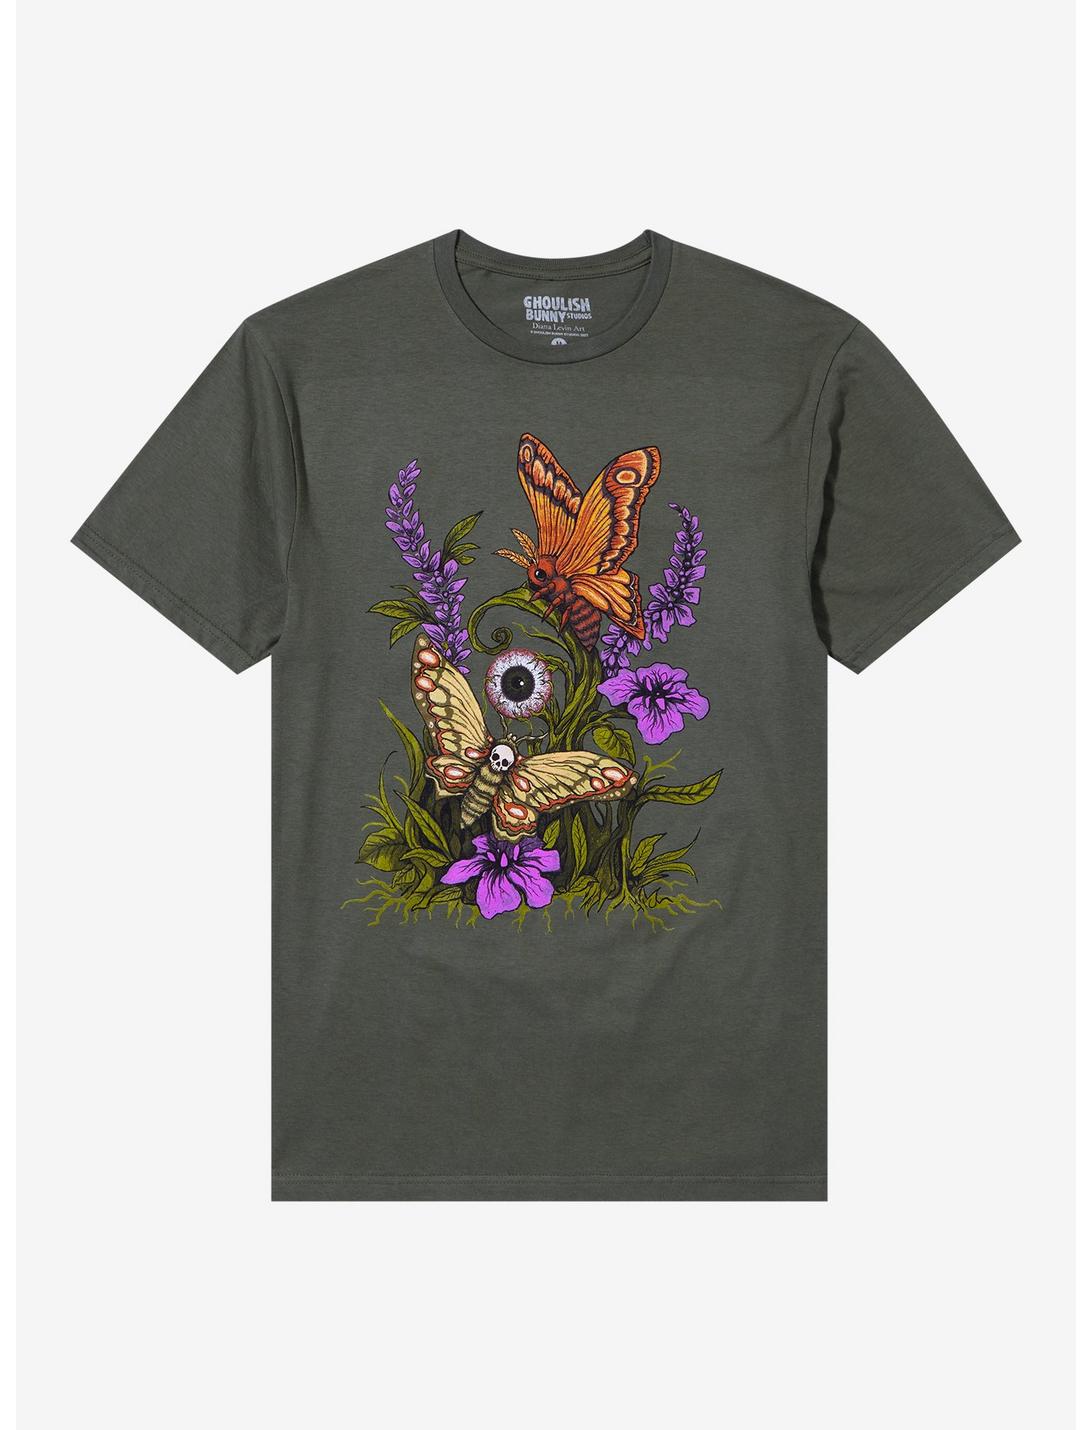 Eyeball Moths T-Shirt By Ghoulish Bunny Studios, FOREST GREEN, hi-res